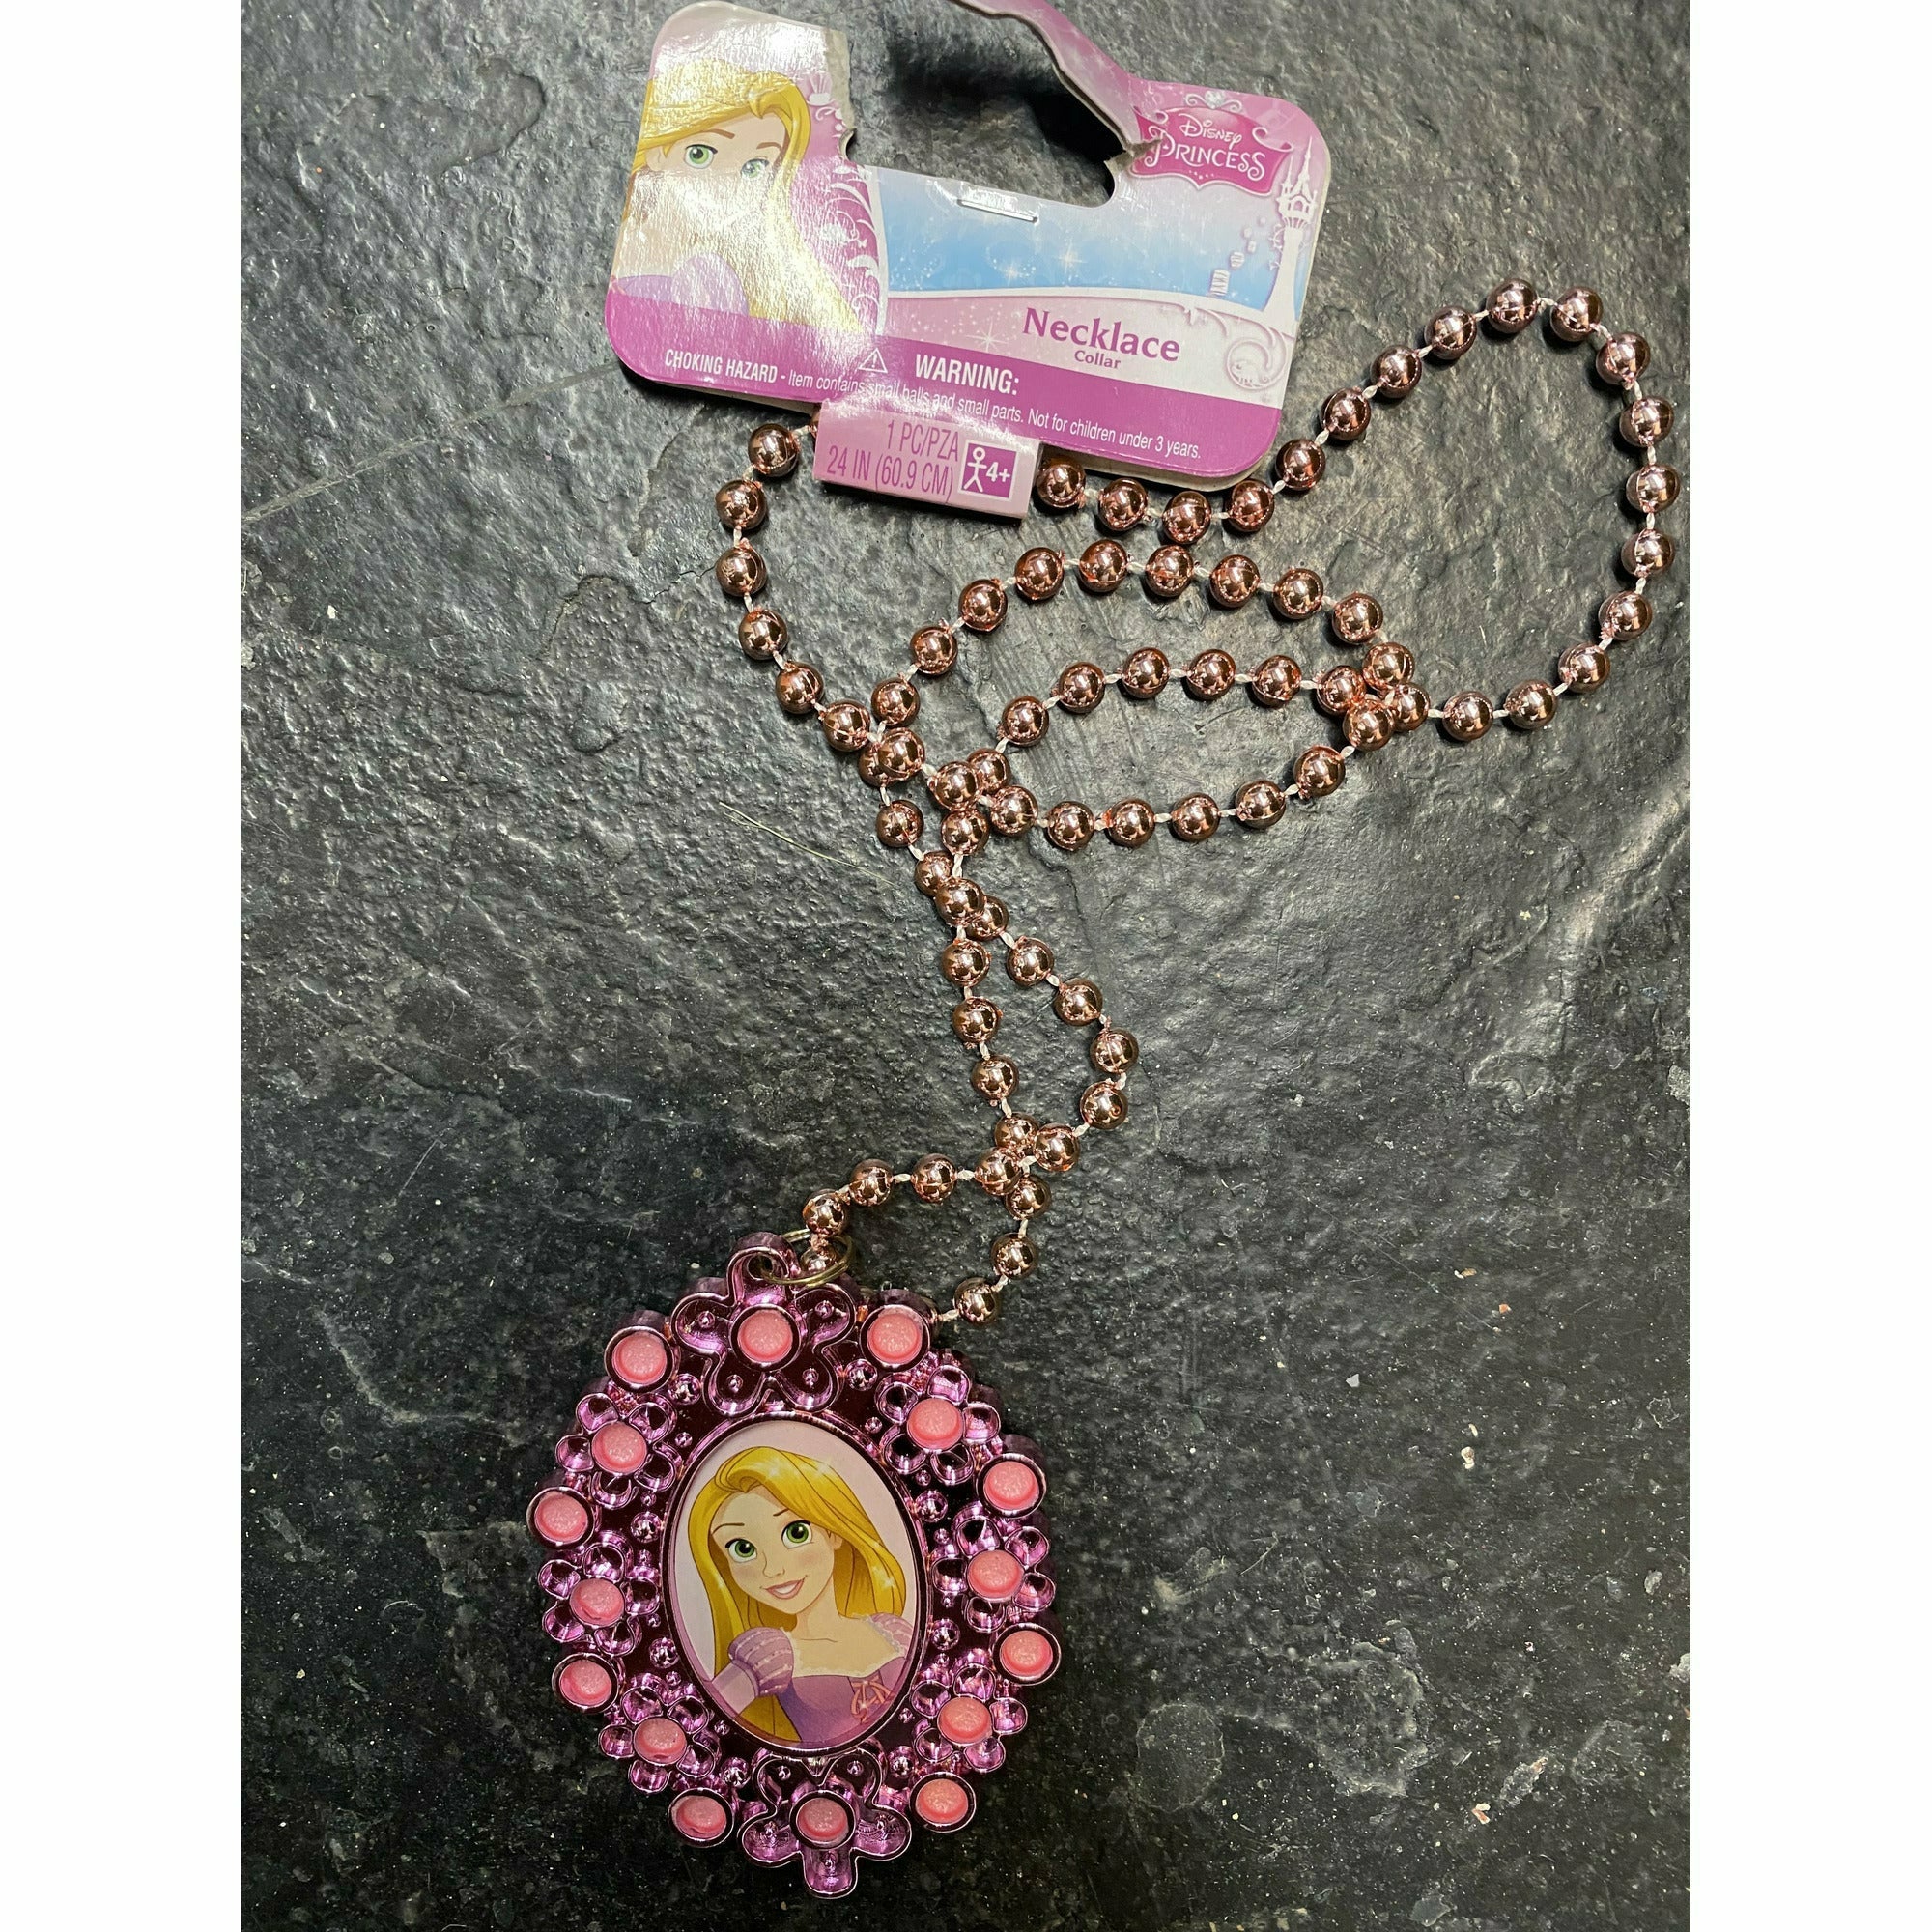 COSTUMES USA COSTUMES: ACCESSORIES Rapunzel Necklace